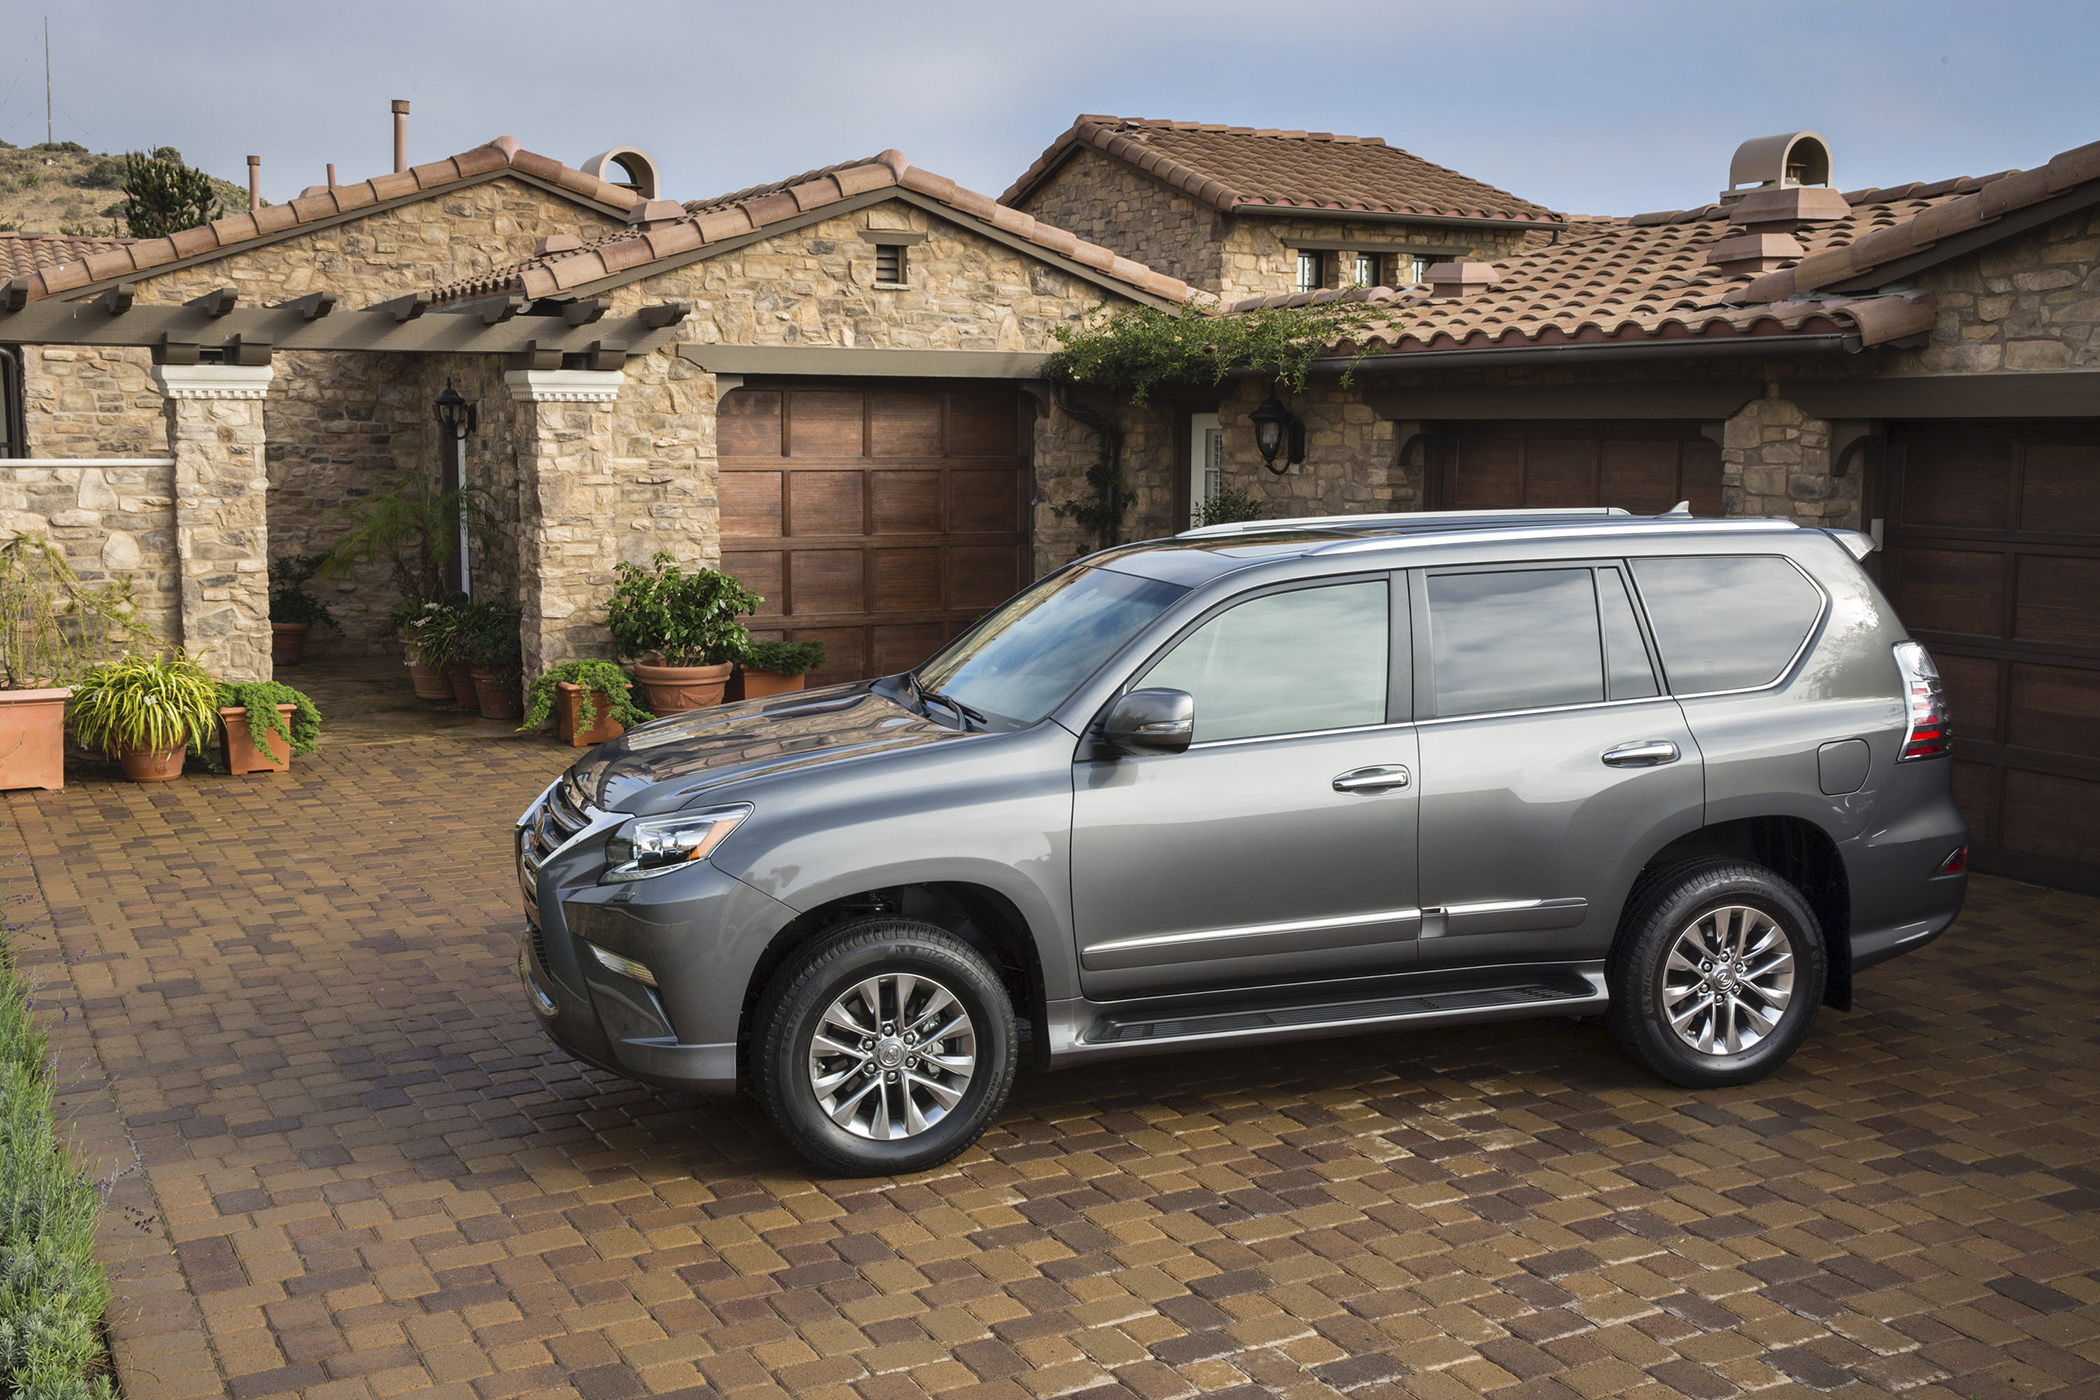 <strong>Best SUV:</strong> The <a href="http://www.edmunds.com/lexus/gx-460/2016/" target="_blank">Lexus GX 460</a>, with a true ownership cost of $60,439, loses 43% of its value over five years—10% more than its non-luxury counterpart.